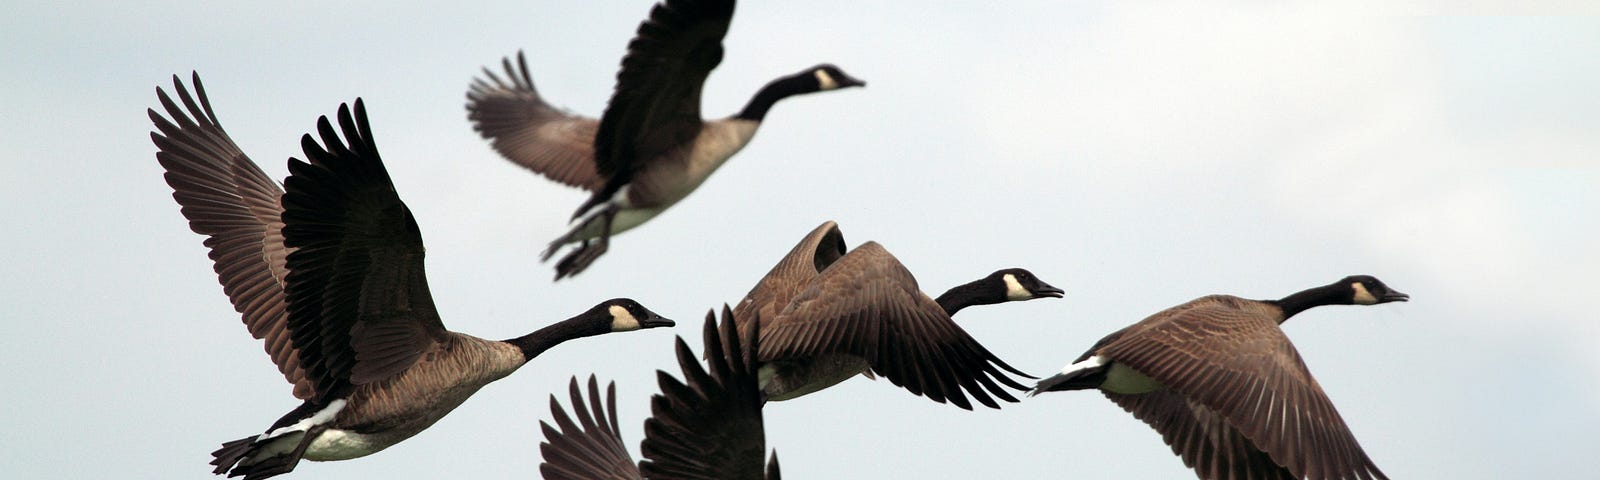 Six geese flying in formation.